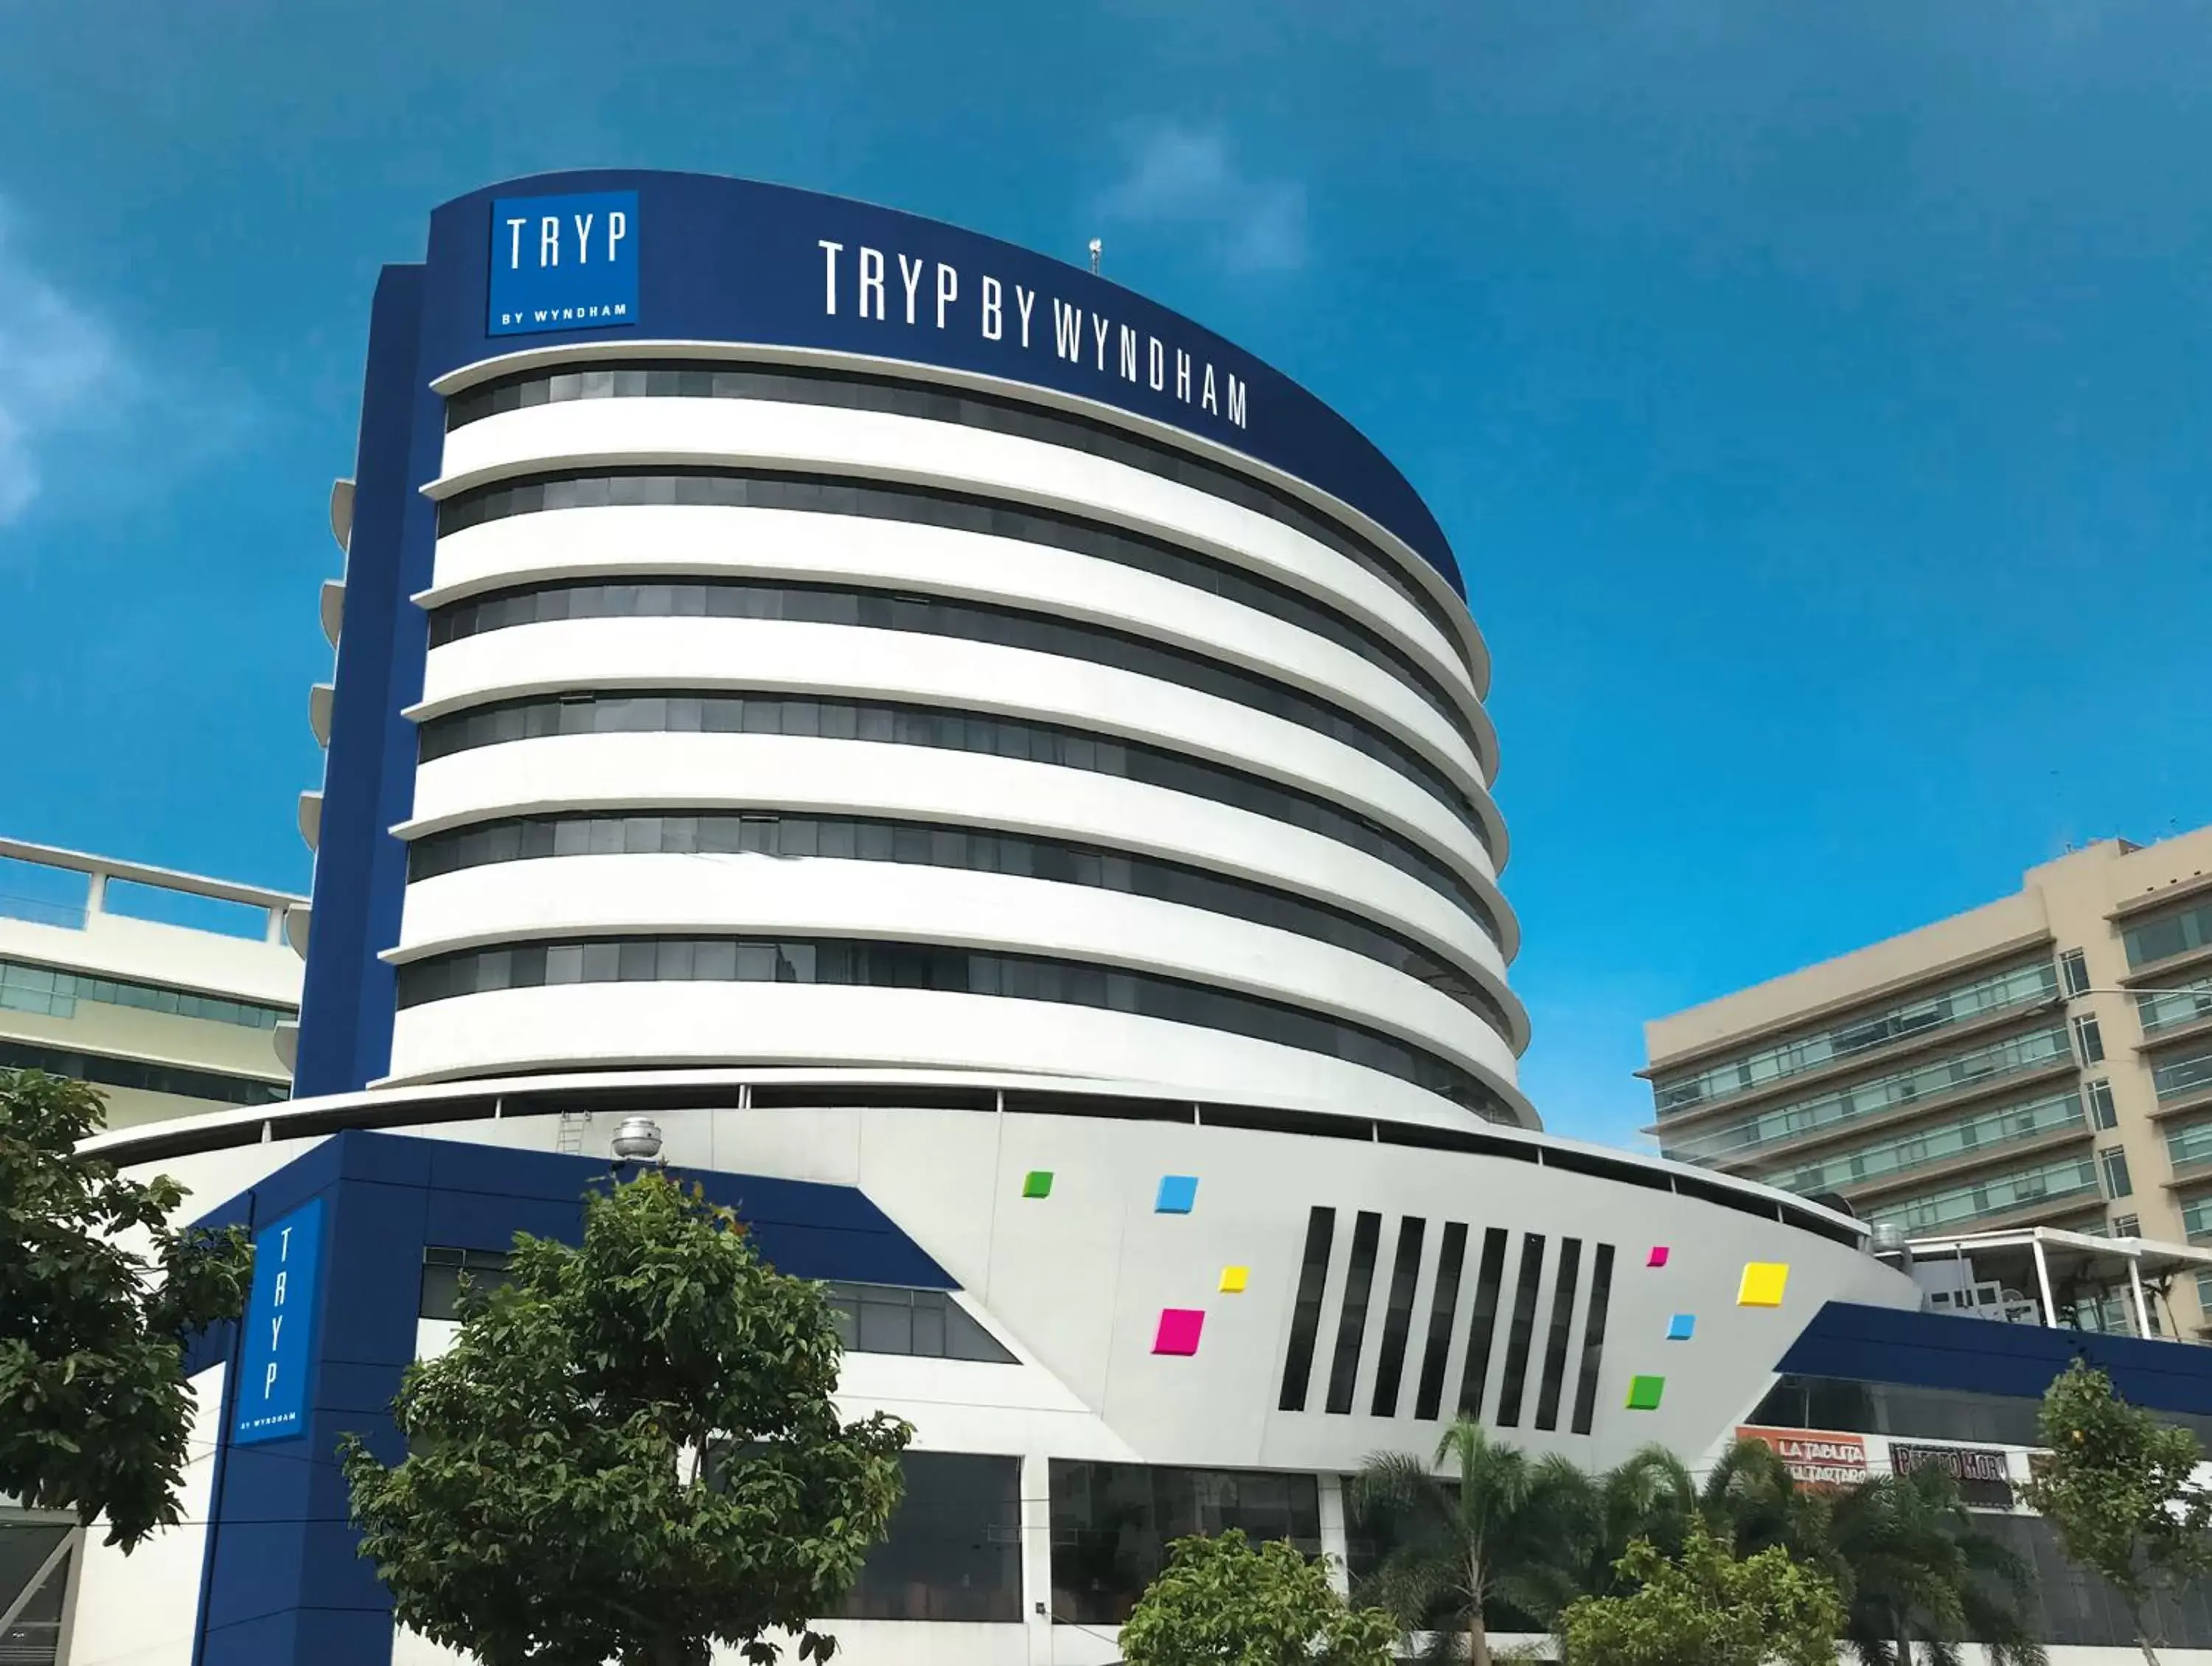 Property building in TRYP by Wyndham Guayaquil